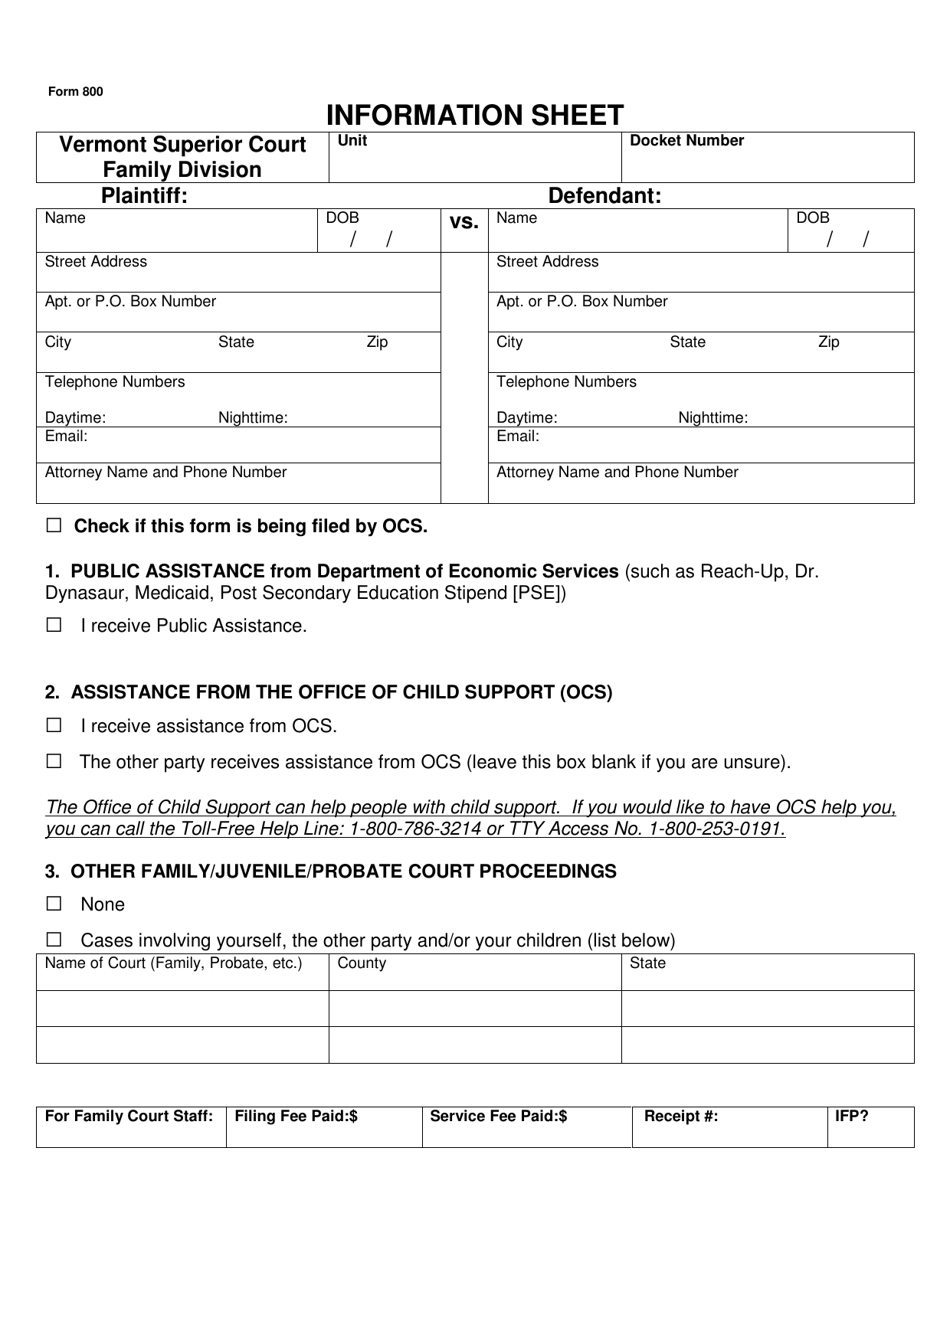 Form 800 Information Sheet - Vermont, Page 1